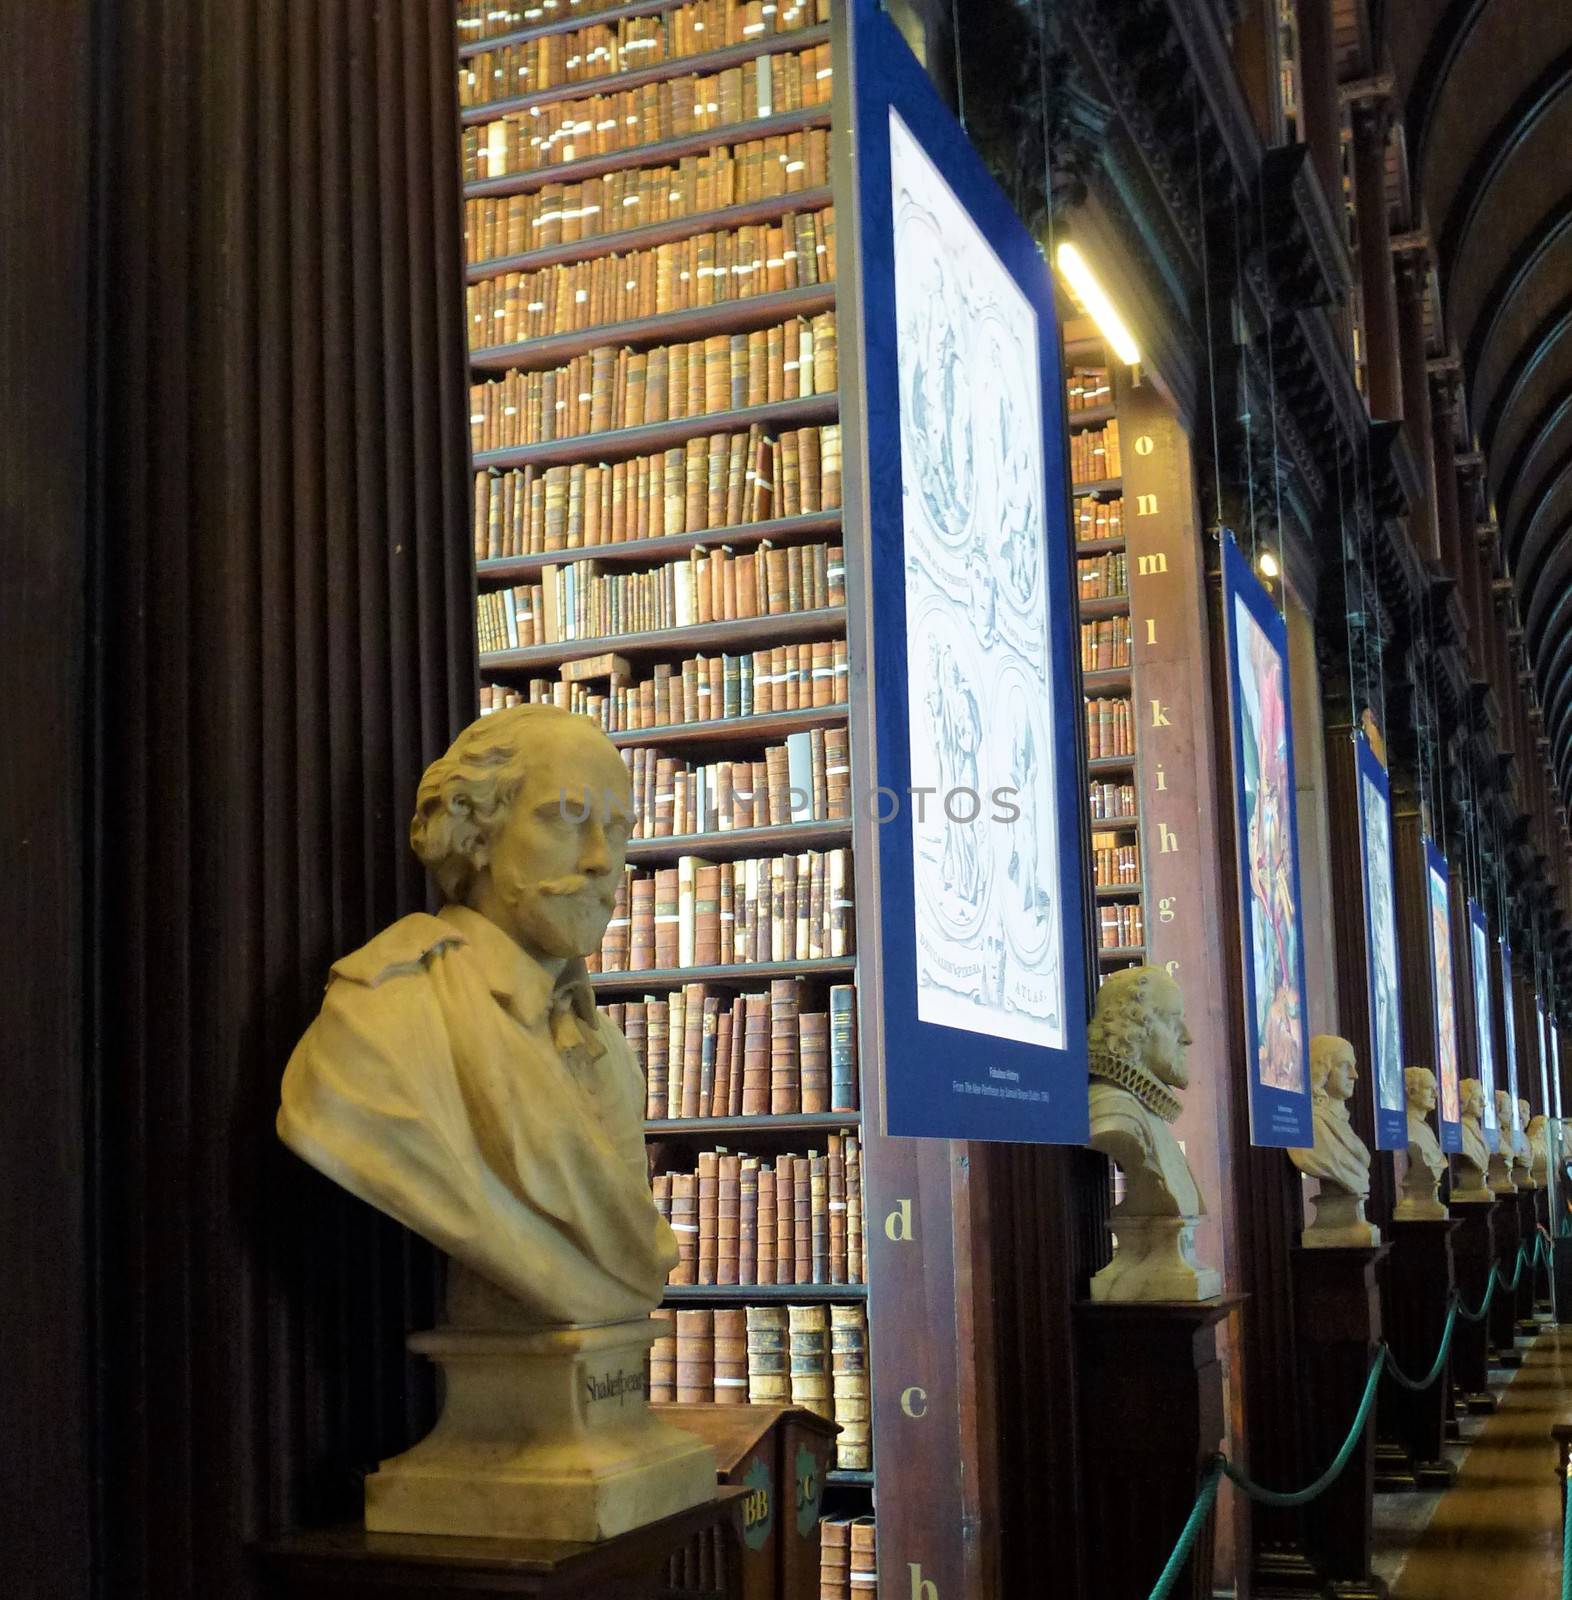 Library of Trinity College Dublin by pisces2386